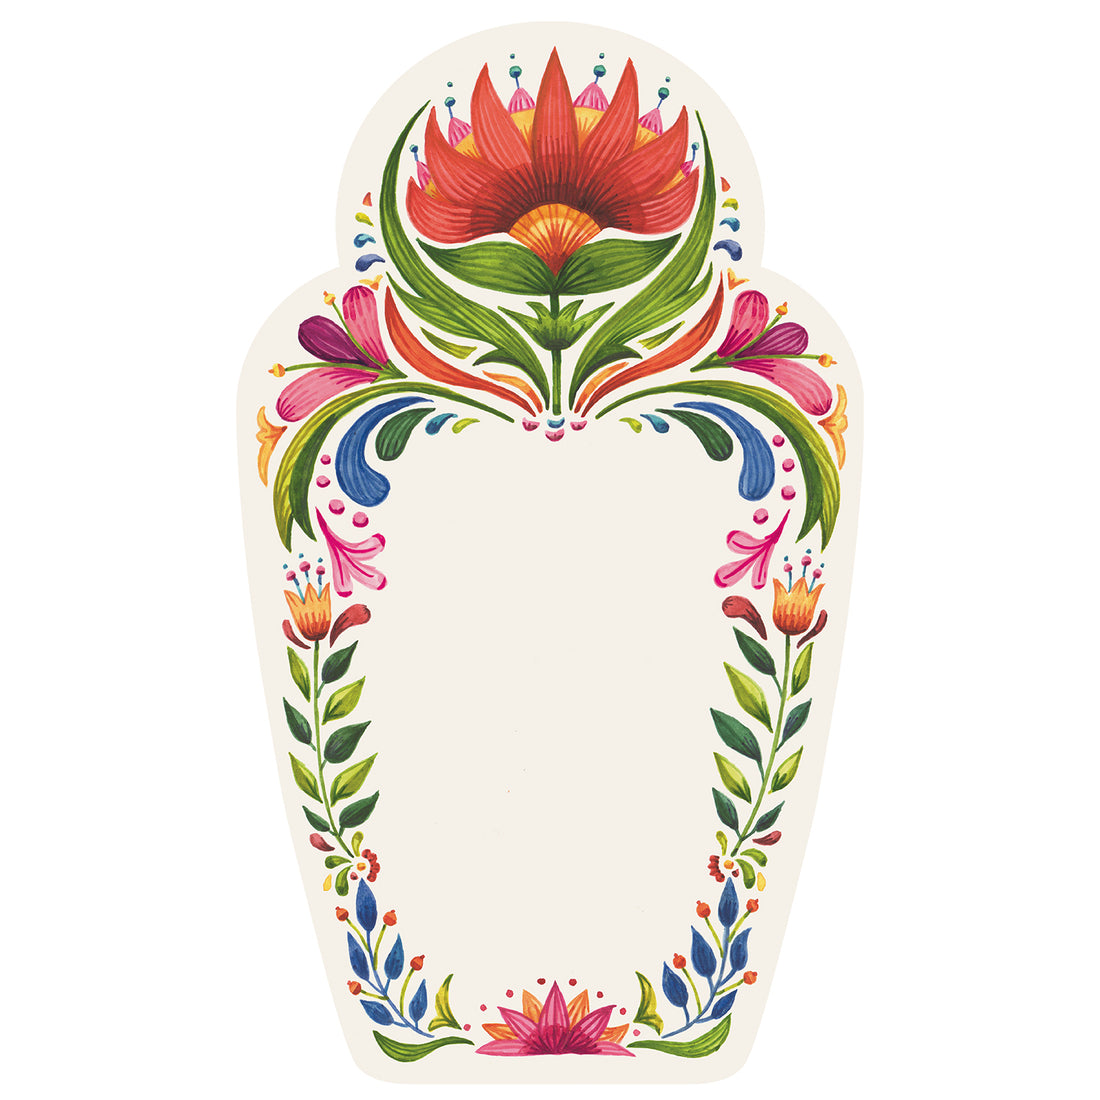 A colorful Hester &amp; Cook Fiesta Floral Table Card design on a white background, perfect for table cards with ample writing space.